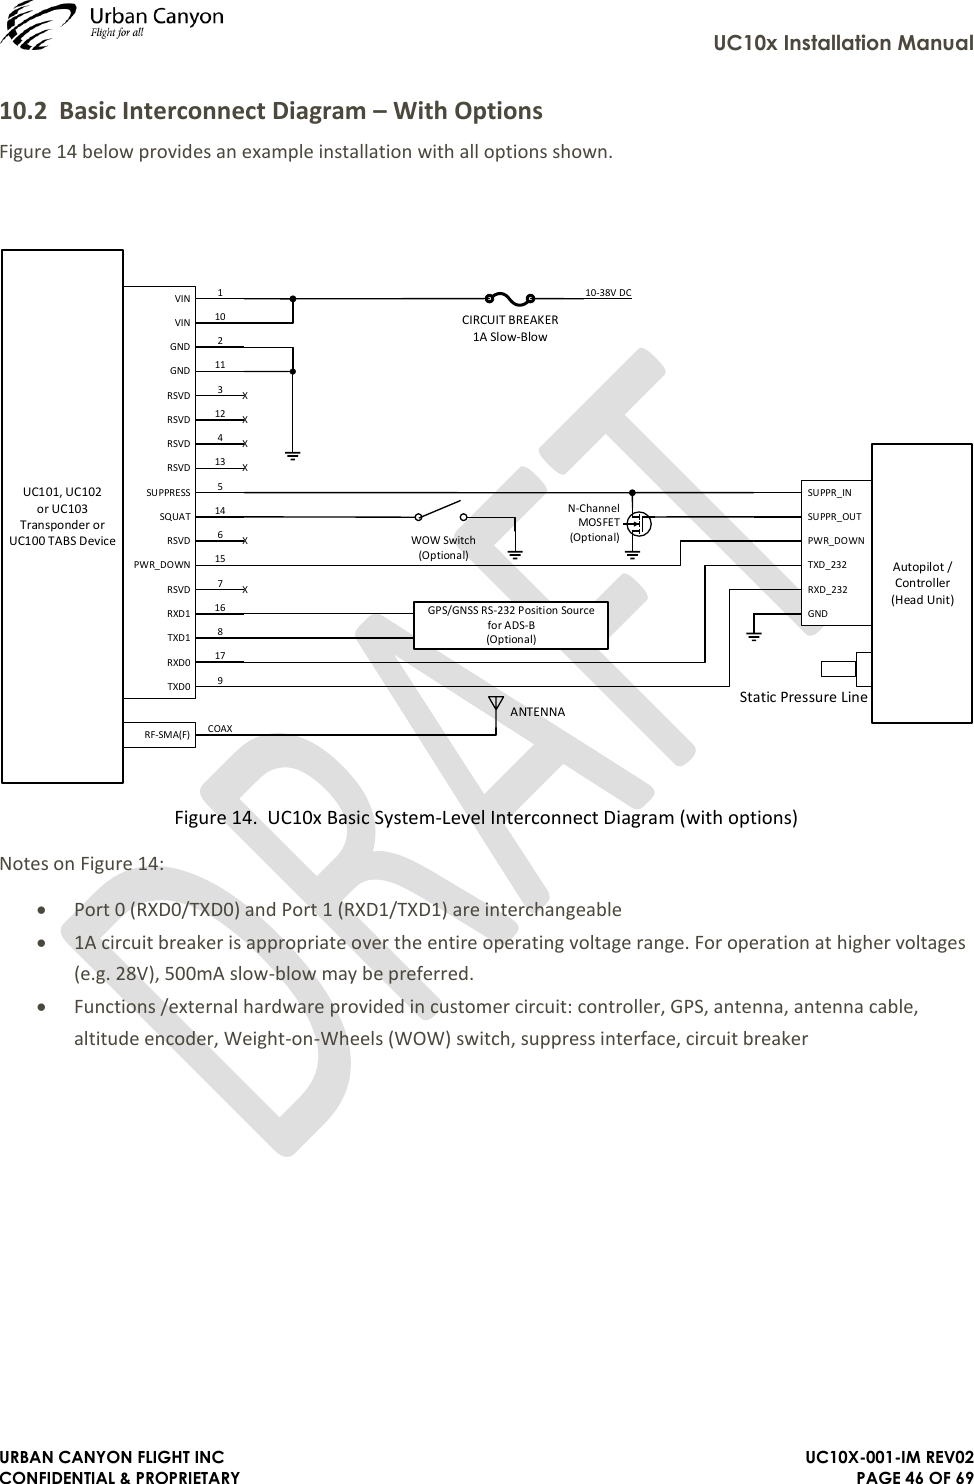     UC10x Installation Manual  URBAN CANYON FLIGHT INC   UC10X-001-IM REV02 CONFIDENTIAL &amp; PROPRIETARY PAGE 46 OF 69 10.2 Basic Interconnect Diagram – With Options Figure 14 below provides an example installation with all options shown. VINVINGNDGNDRSVDRSVDRSVDRSVDSUPPRESSSQUATRSVDPWR_DOWNRSVDRXD1TXD1RXD0TXD0RF-SMA(F)1012113124135146157168179COAXUC101, UC102 or UC103Transponder or UC100 TABS DeviceCIRCUIT BREAKER1A Slow-BlowXXXXXXANTENNAWOW Switch(Optional)GPS/GNSS RS-232 Position Source for ADS-B(Optional)10-38V DCSUPPR_INSUPPR_OUTPWR_DOWNTXD_232RXD_232GNDAutopilot / Controller(Head Unit)Static Pressure LineN-Channel MOSFET(Optional) Figure 14.  UC10x Basic System-Level Interconnect Diagram (with options) Notes on Figure 14: • Port 0 (RXD0/TXD0) and Port 1 (RXD1/TXD1) are interchangeable • 1A circuit breaker is appropriate over the entire operating voltage range. For operation at higher voltages (e.g. 28V), 500mA slow-blow may be preferred. • Functions /external hardware provided in customer circuit: controller, GPS, antenna, antenna cable, altitude encoder, Weight-on-Wheels (WOW) switch, suppress interface, circuit breaker  